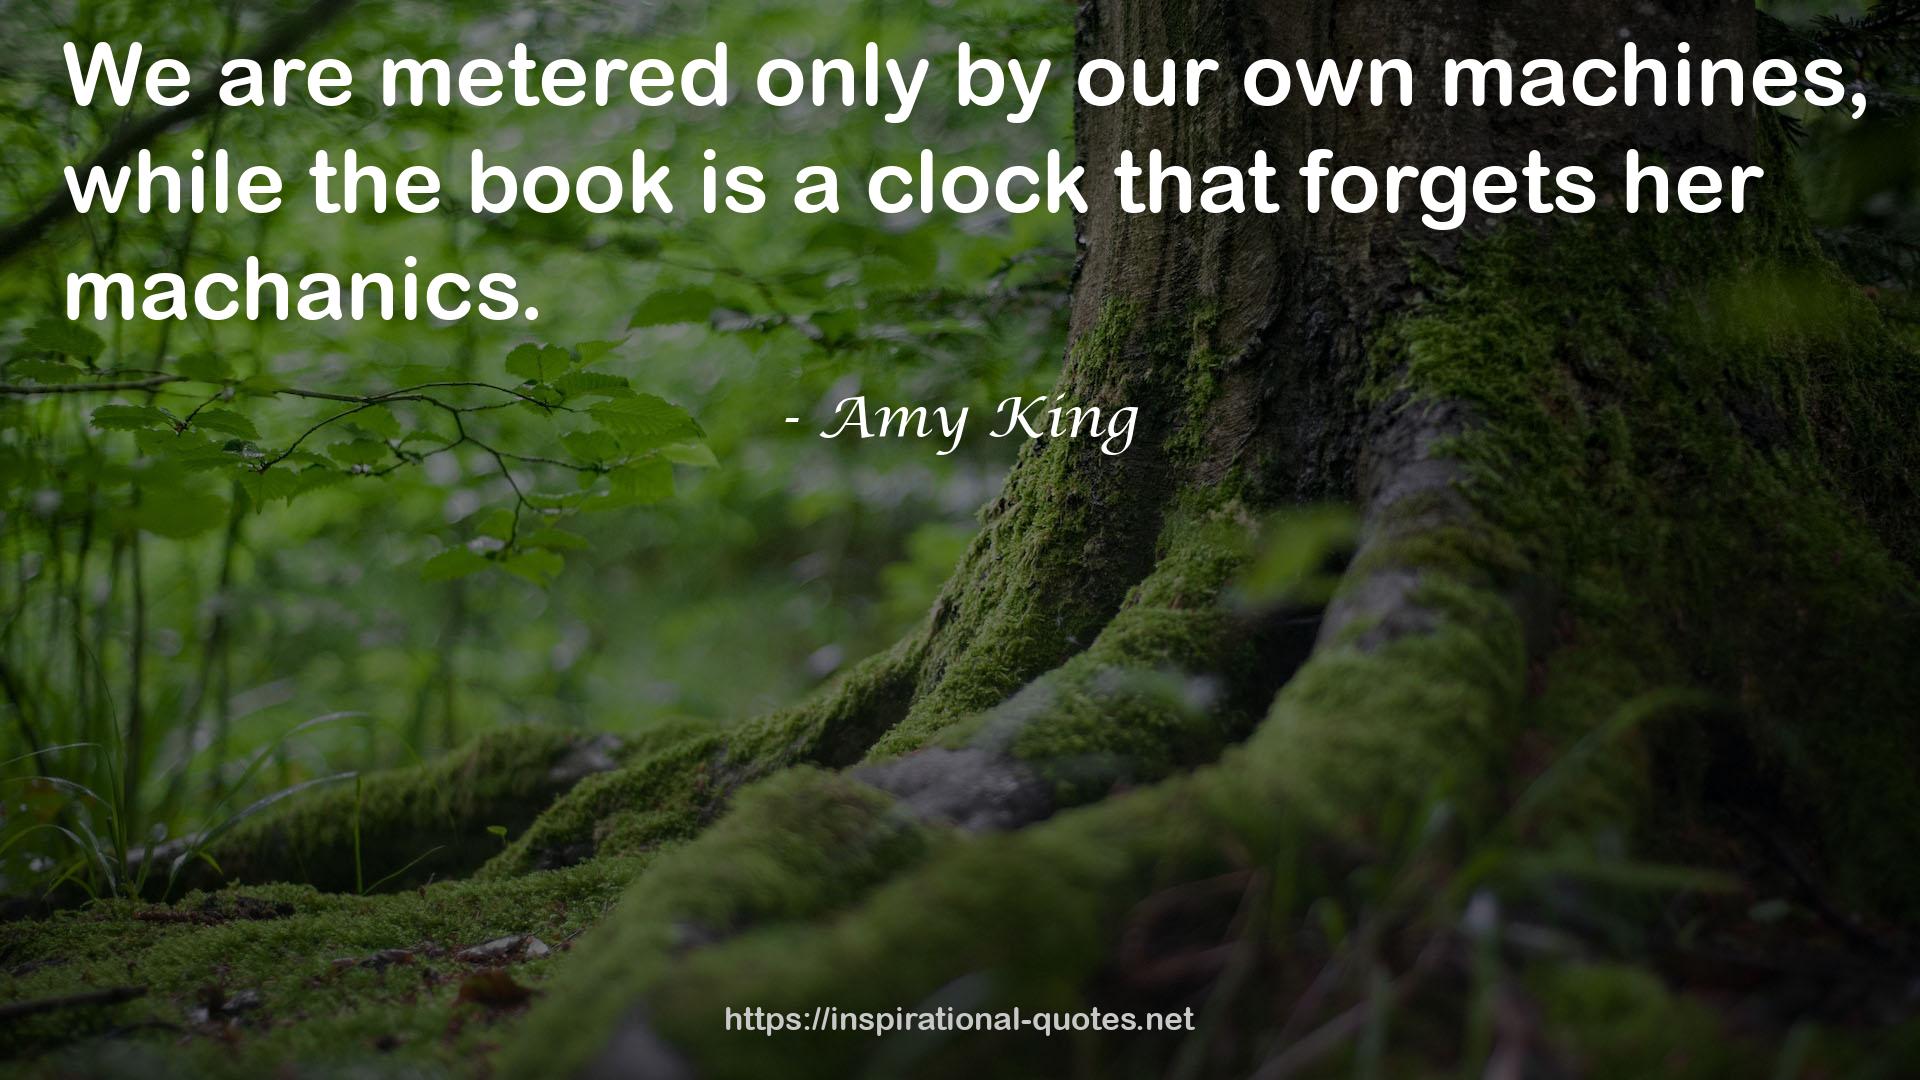 Amy King QUOTES